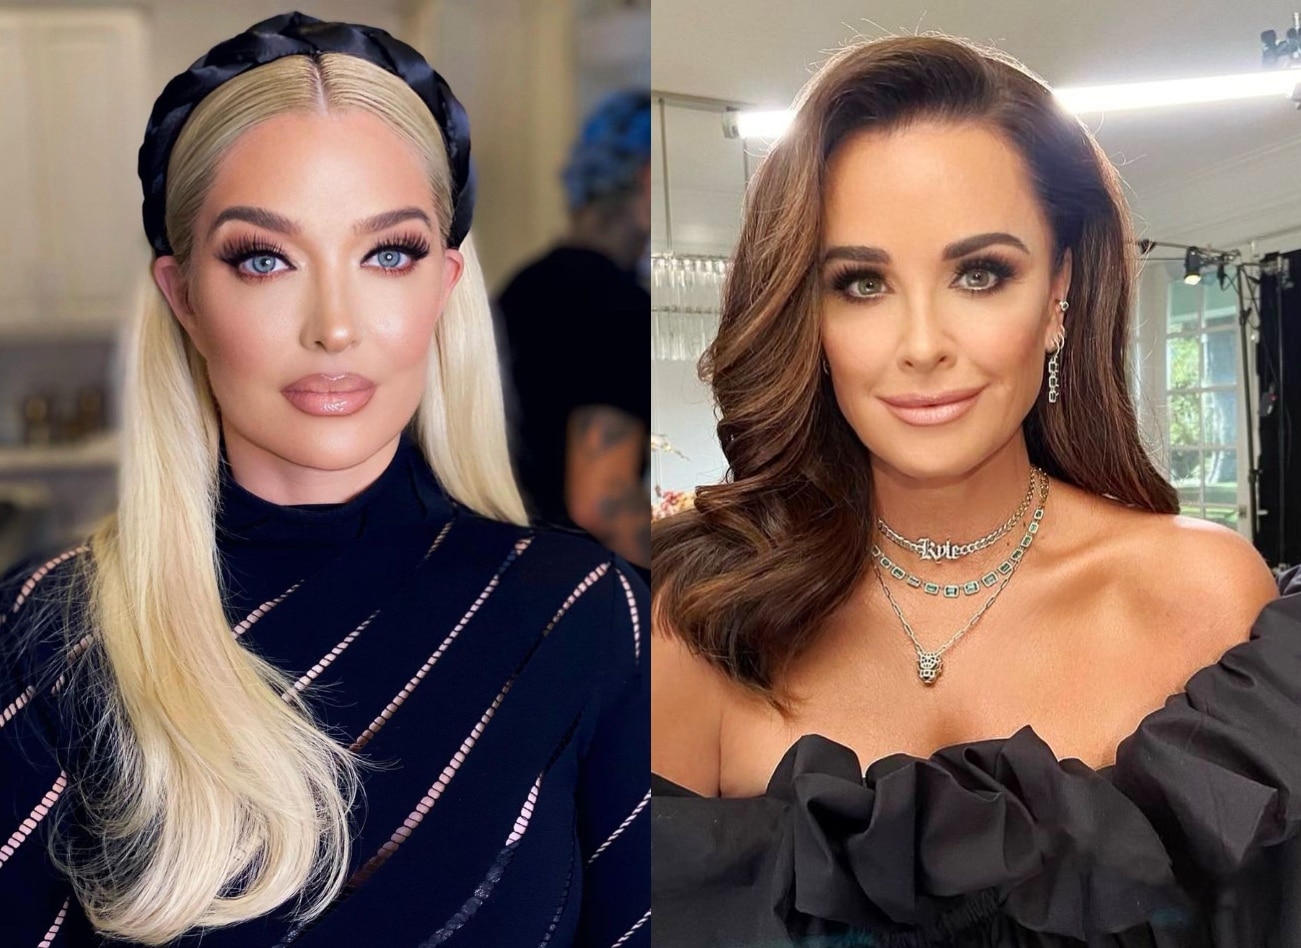 RHOBH's Erika Jayne Had "Ugly Showdown" With Kyle Richards After Reunion, Feels Kyle Isn't Trustworthy as Falling Out Takes Center Stage Ahead of Season 12